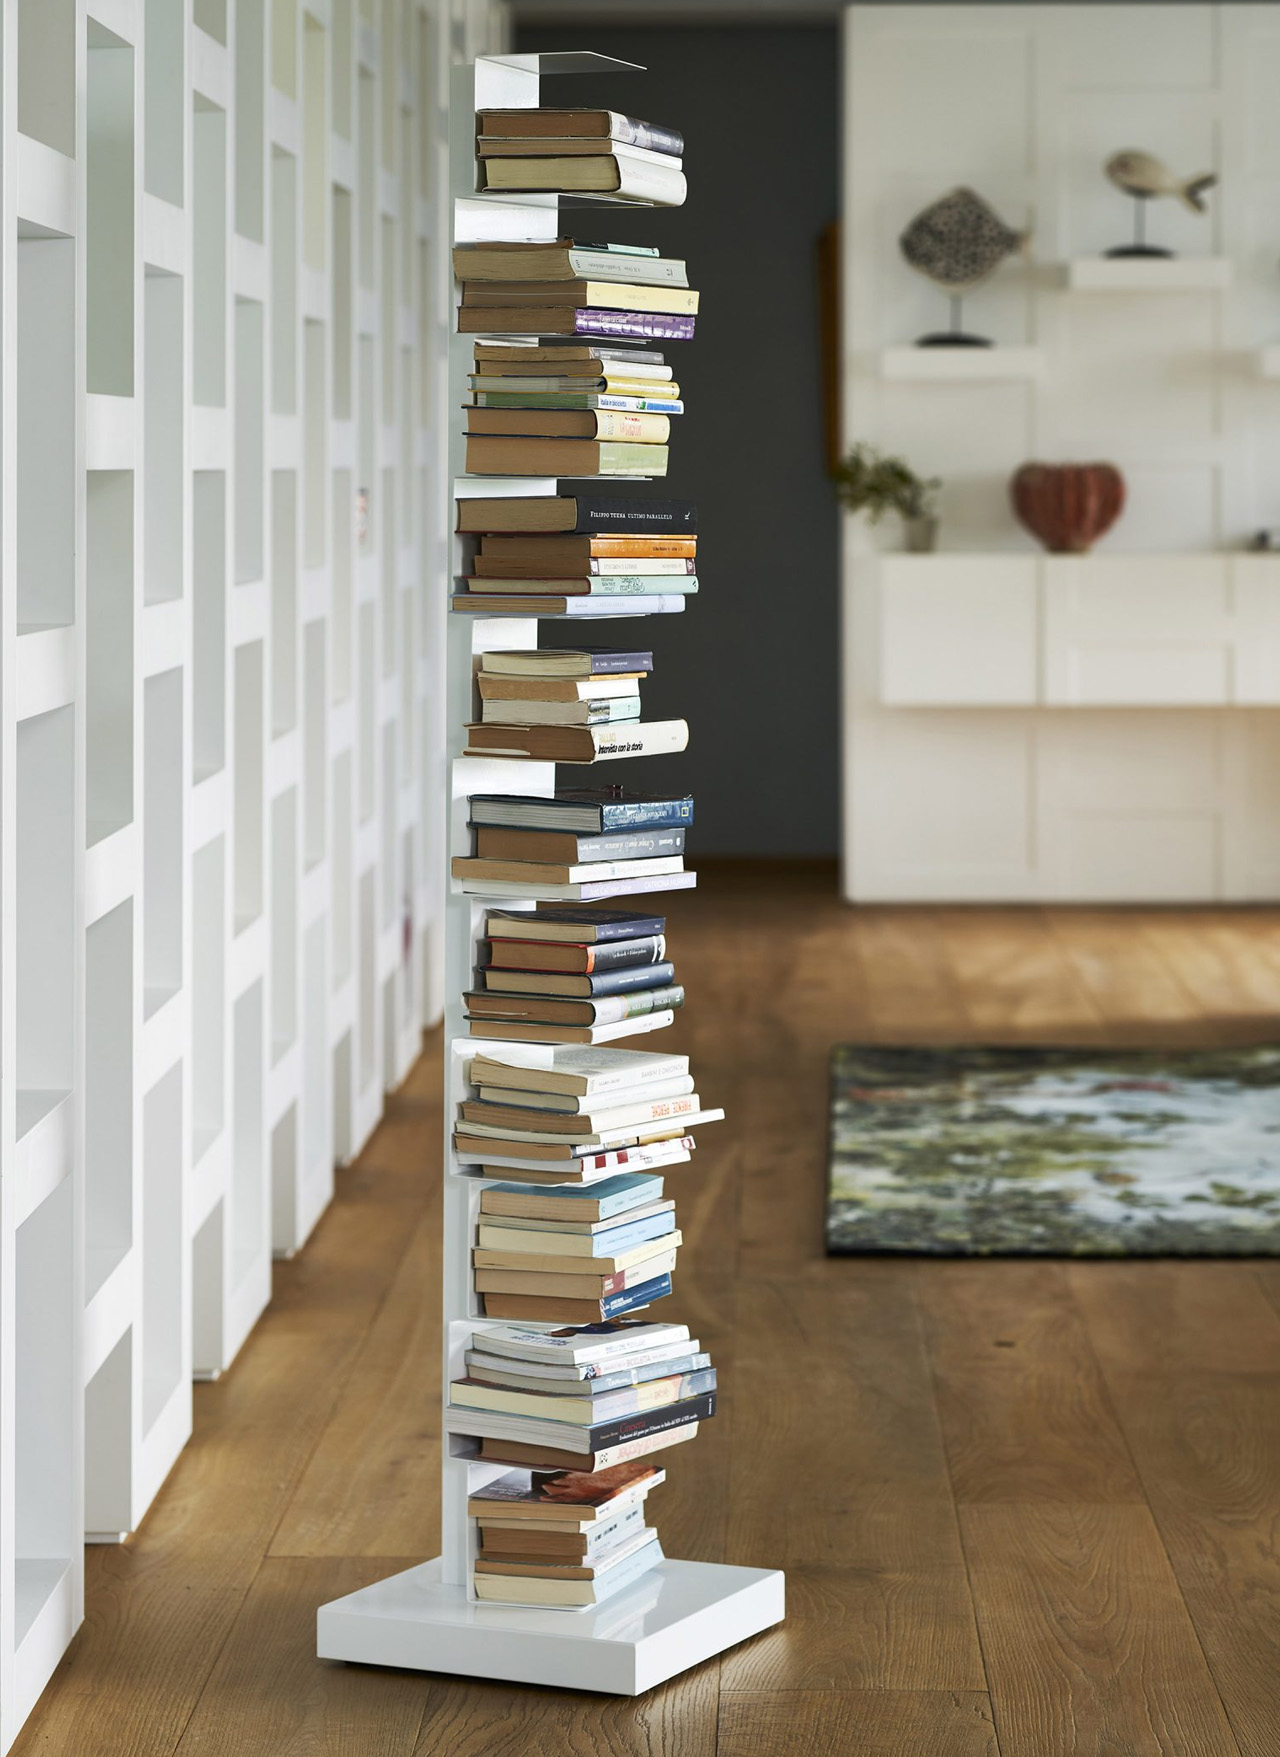 This unique bookshelf disappears from sight once you fill its thin shelves with books